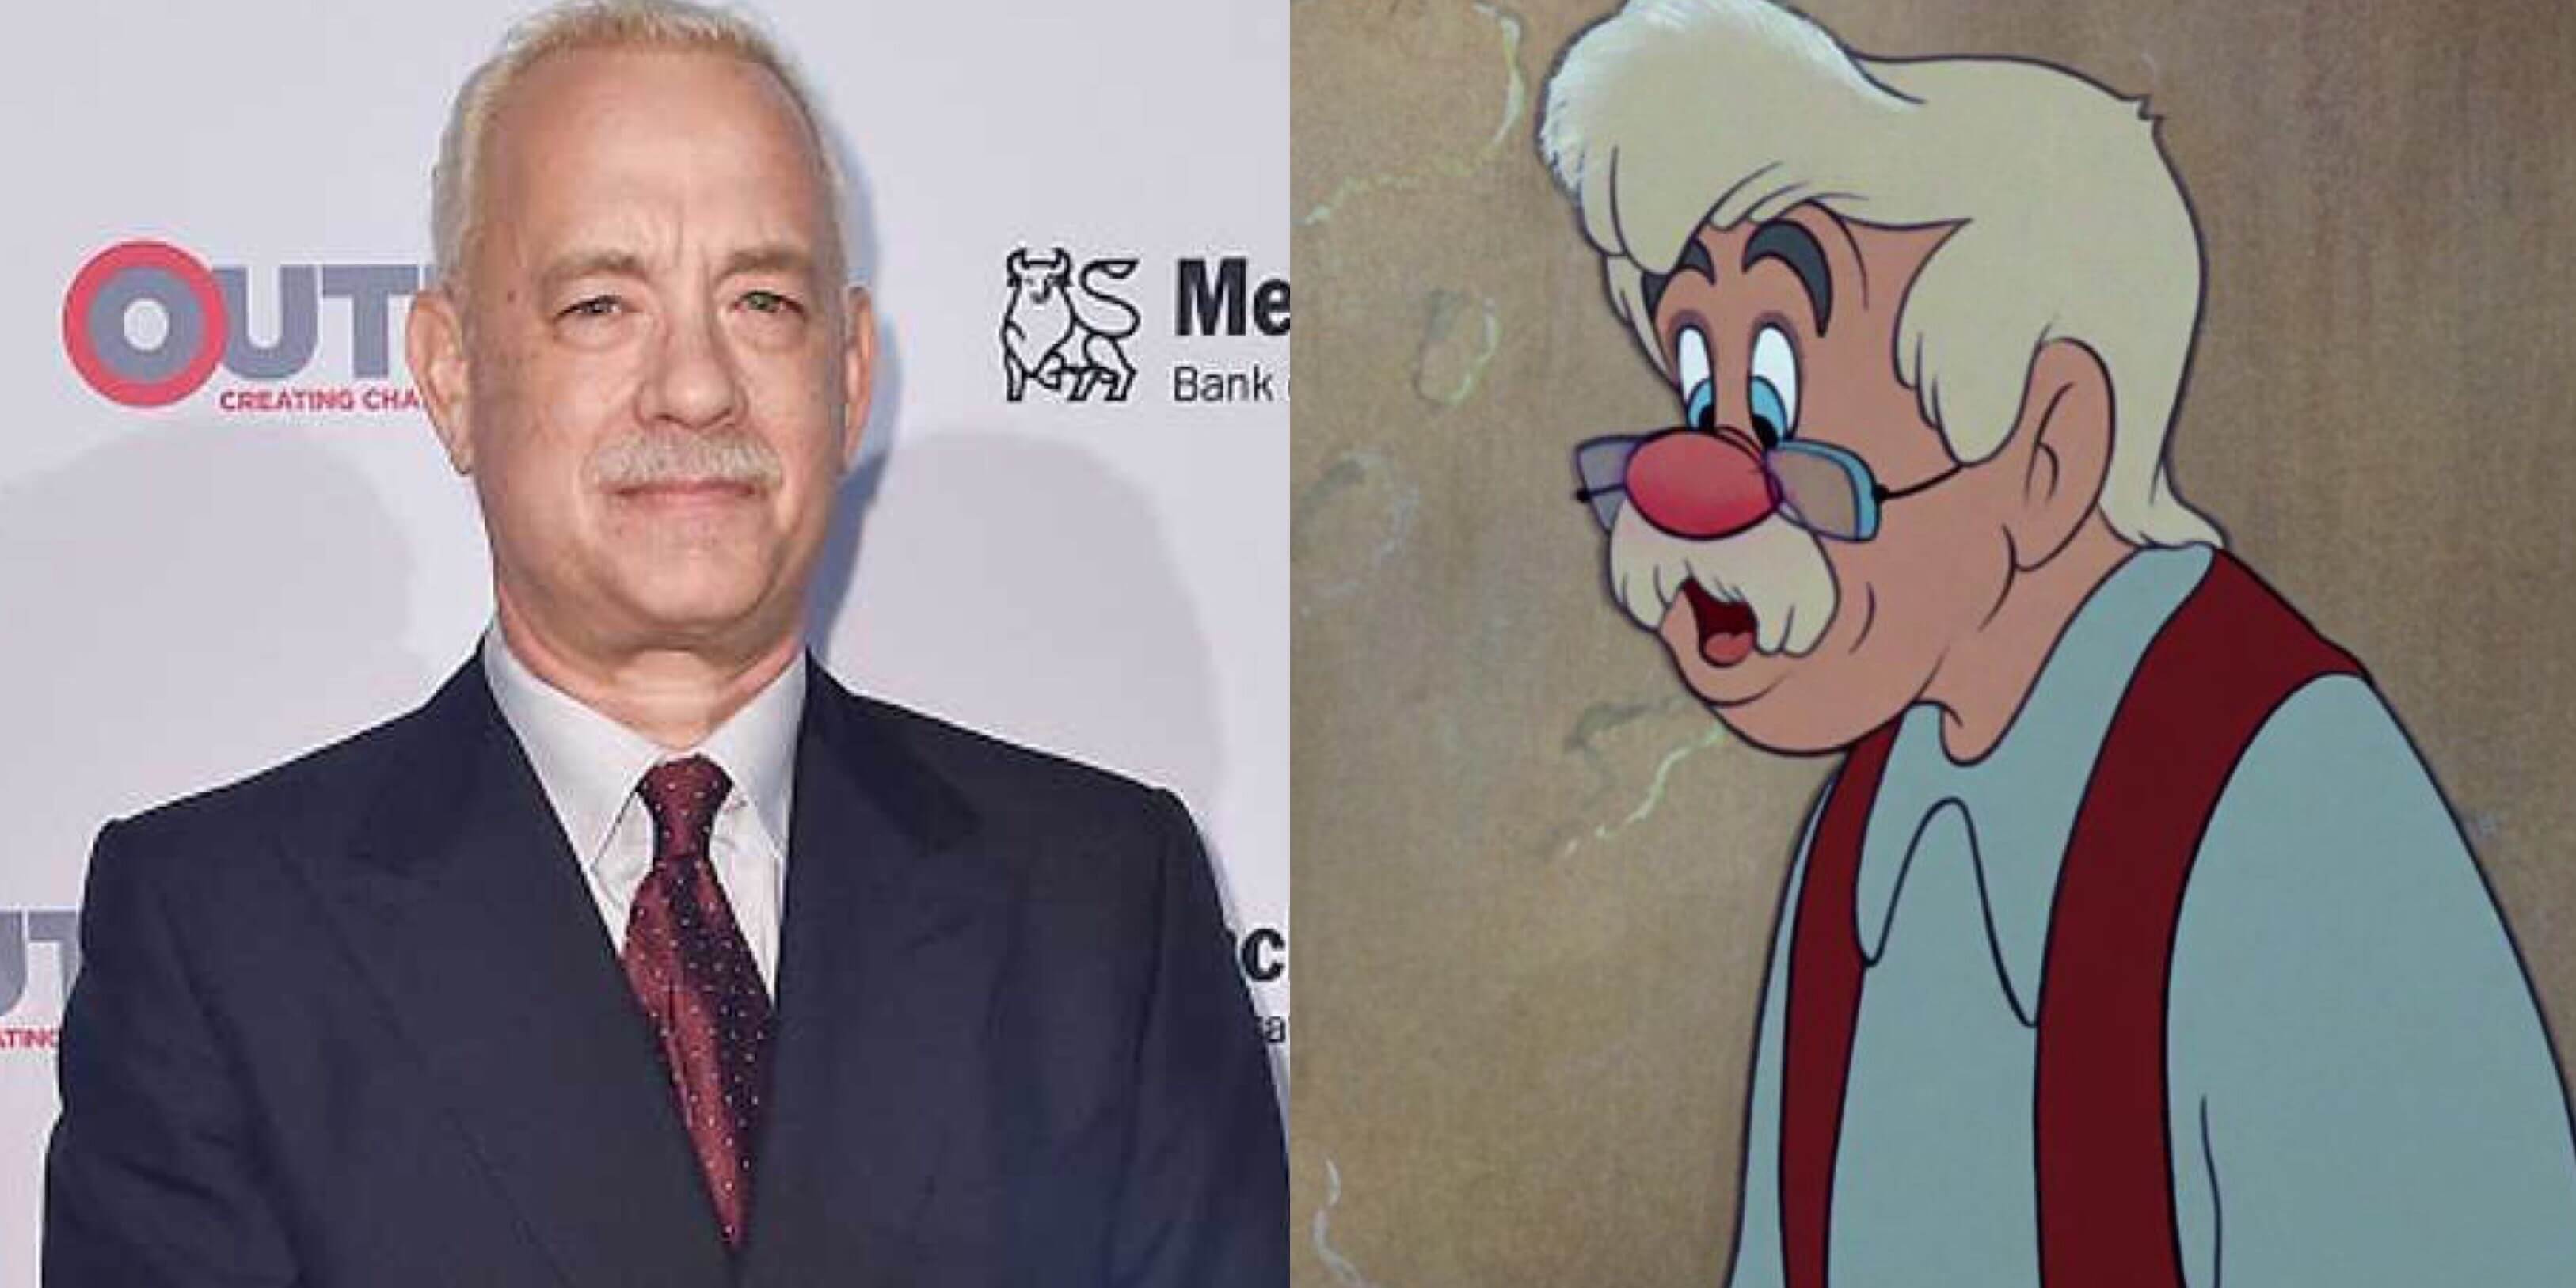 Tom Hanks is Back in Talks to Play Geppetto in Disney’s Live-Action ‘Pinocchio’